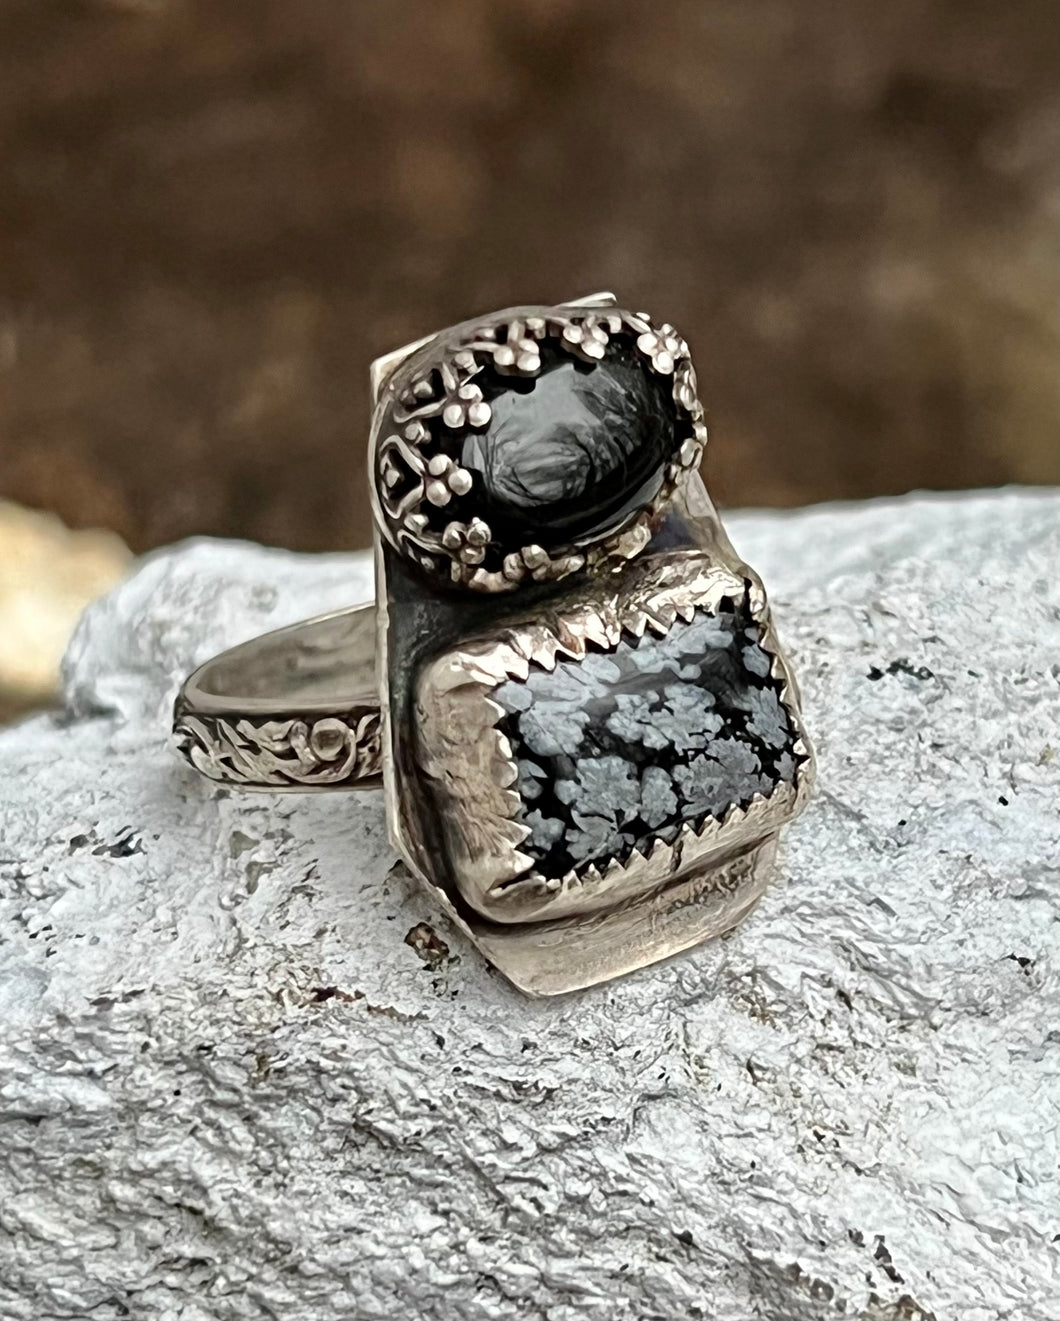 Obsidian and snowflake obsidian sterling ring